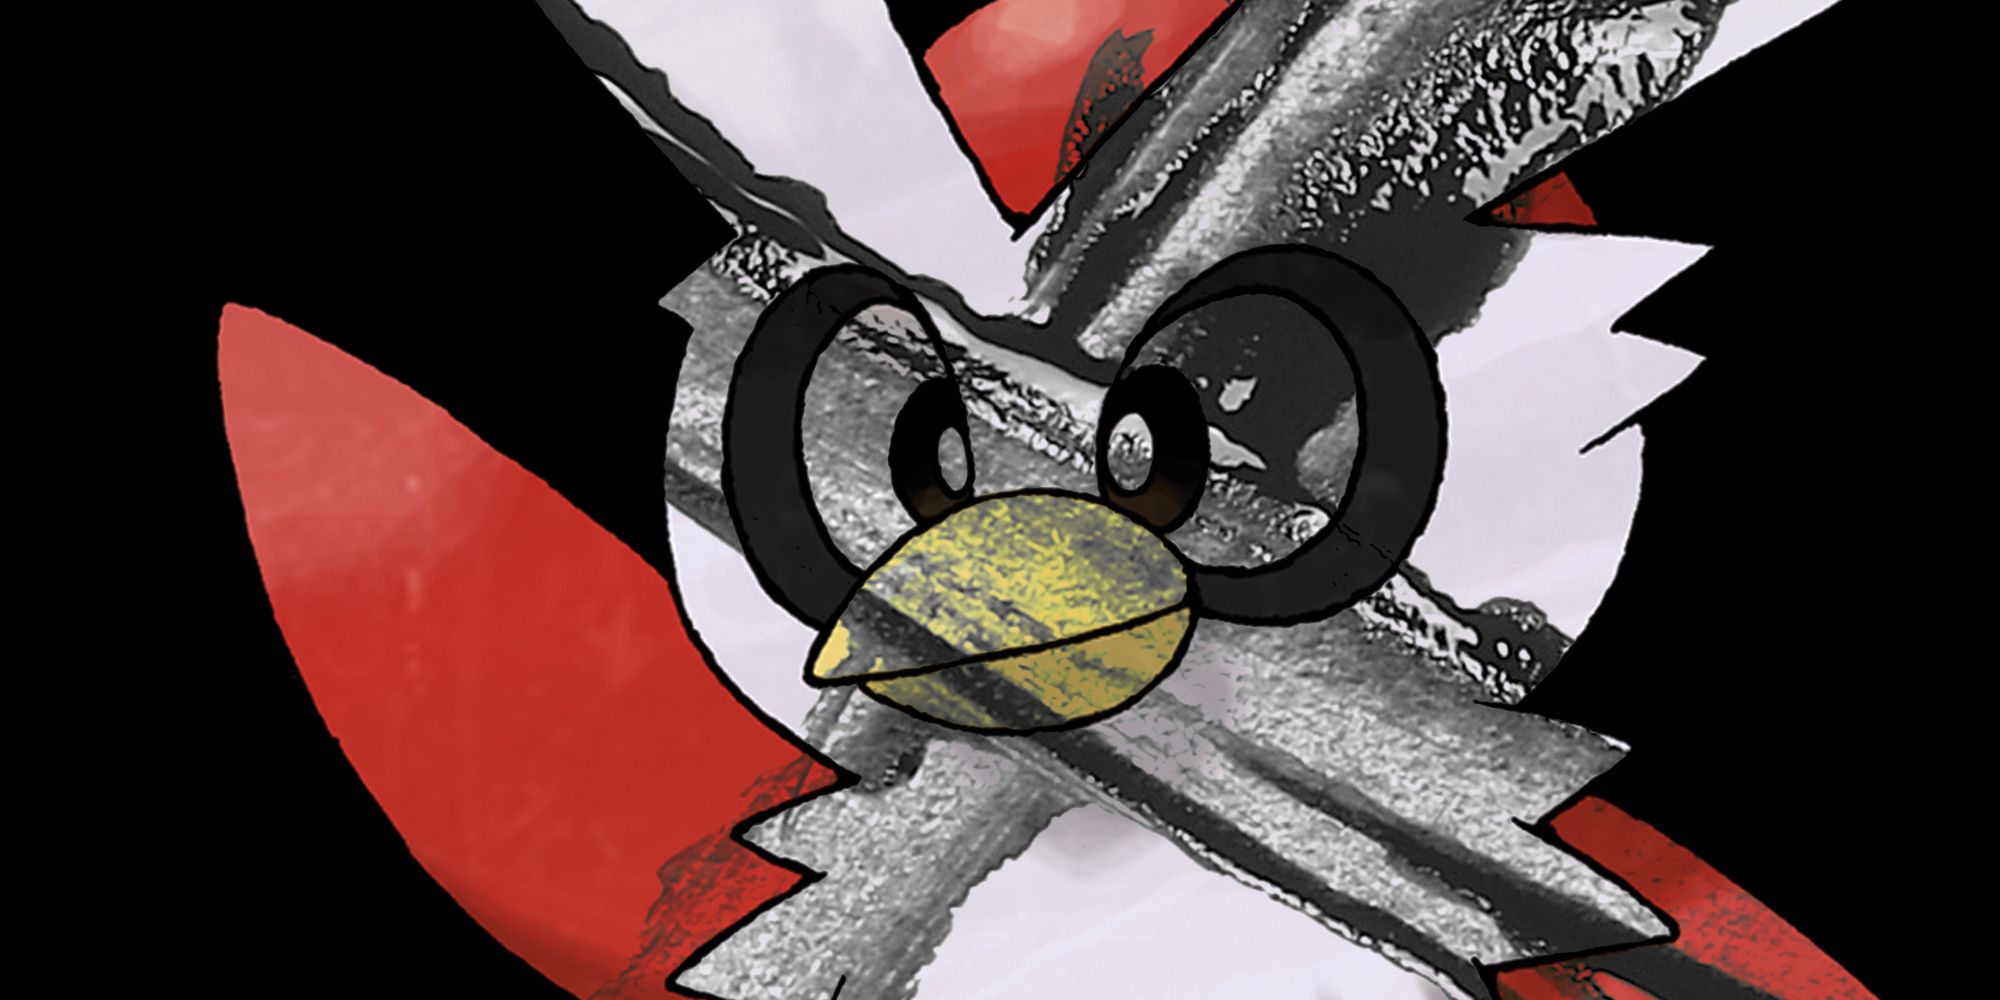 scratched out cross over delibird's face